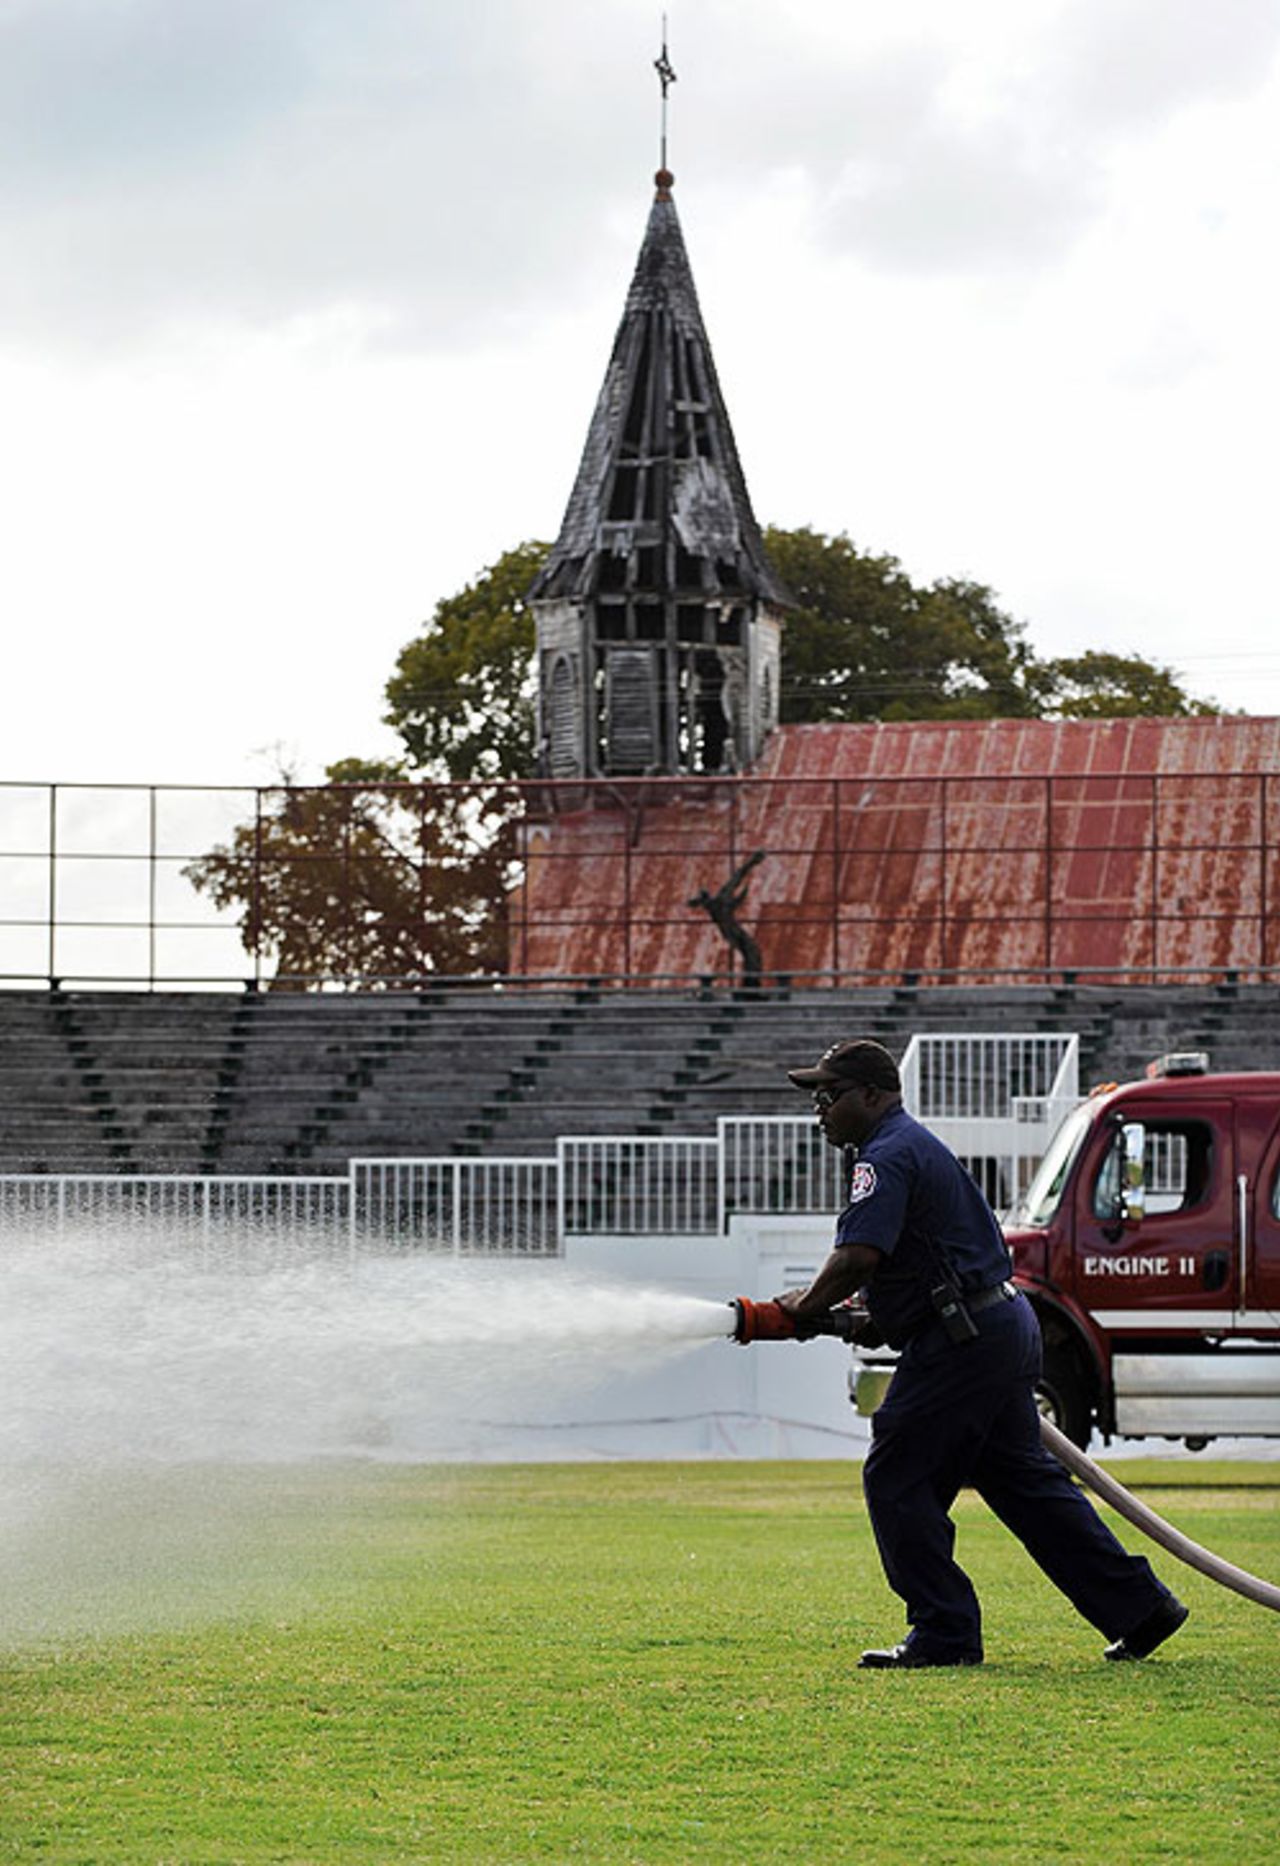 Firefighters are called in to water the outfield at the Antigua Recreation Ground, after its last-minute call-up to host the island's abandoned Test, West Indies v England, 2nd Test, St. John's, Antigua, February 13, 2009